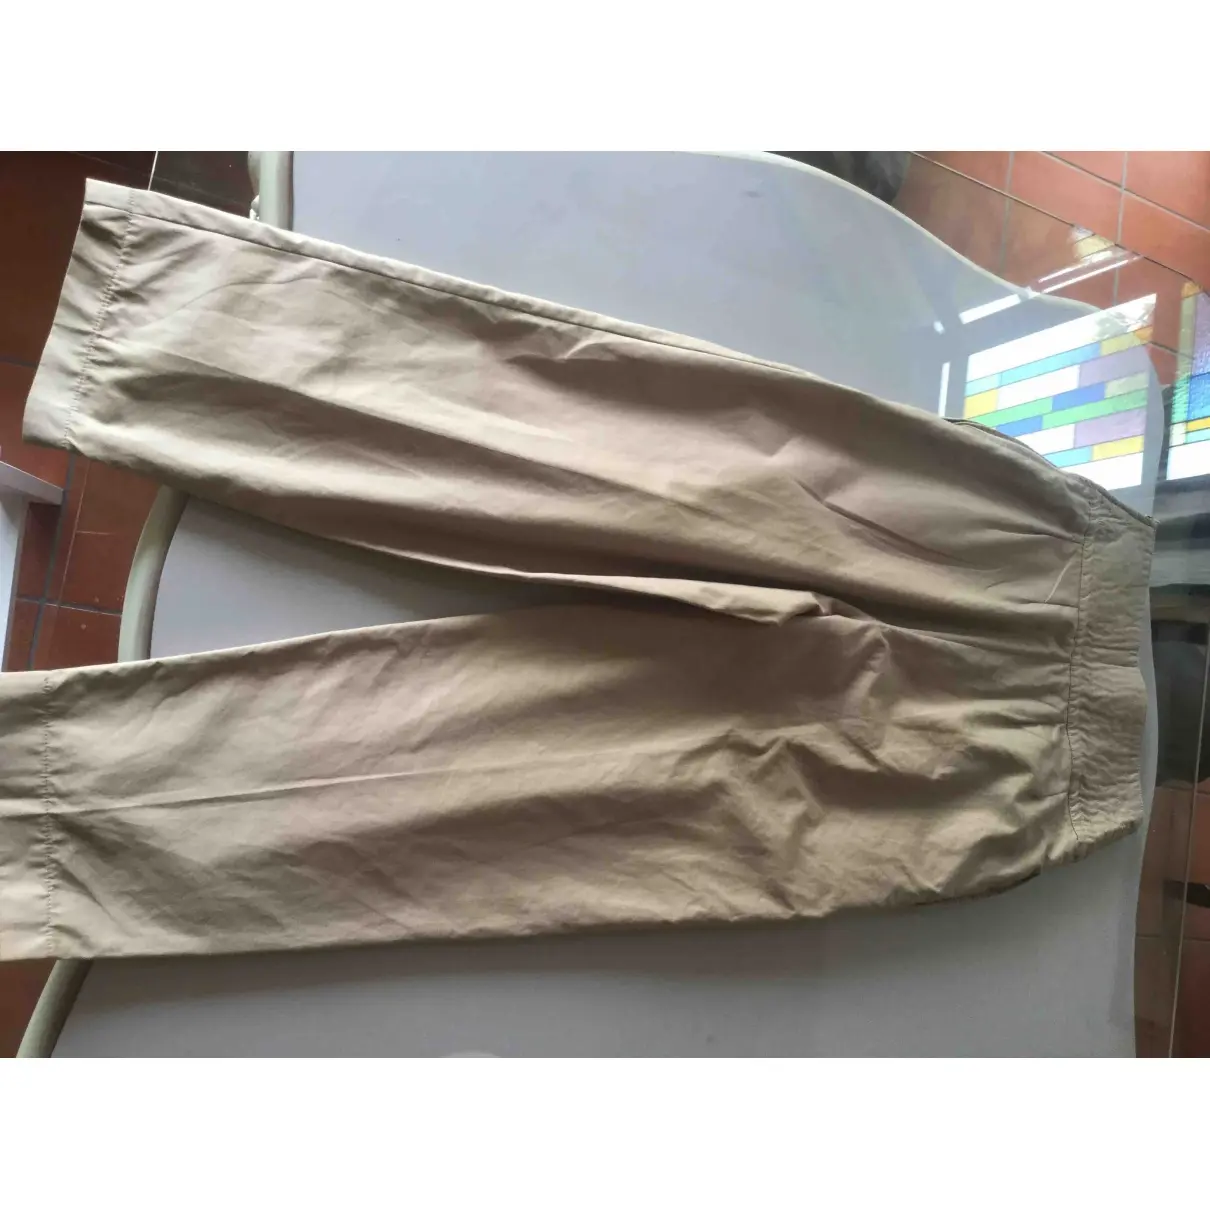 Genny Carot pants for sale